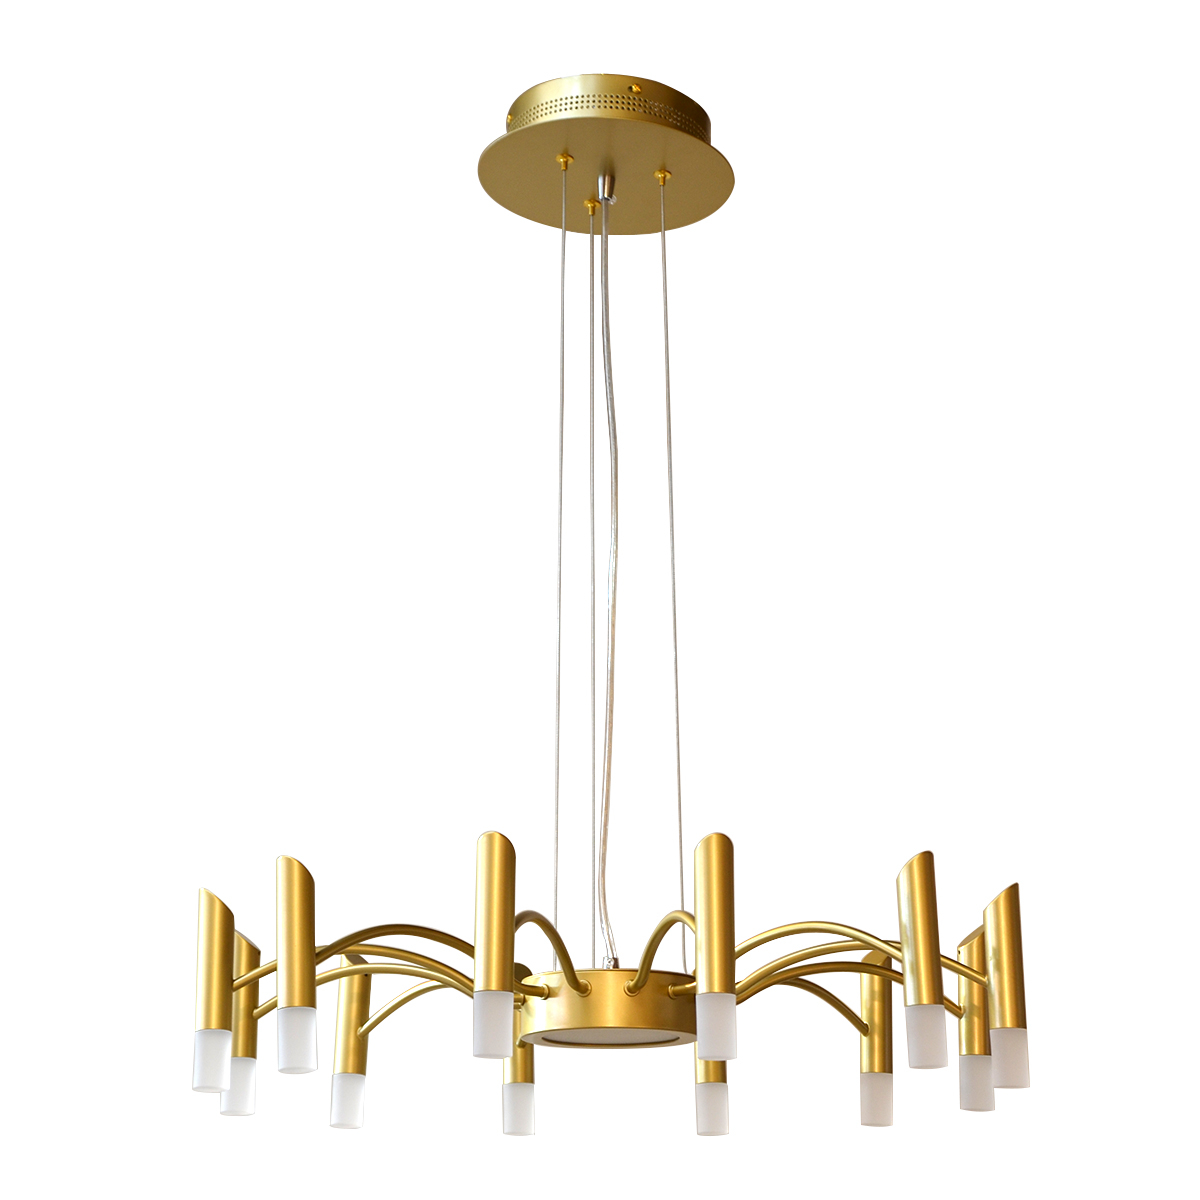 Luxury LED Lexie Chandelier 24 Arms MD2903 82W (3000K) Warm White - Brush Gold